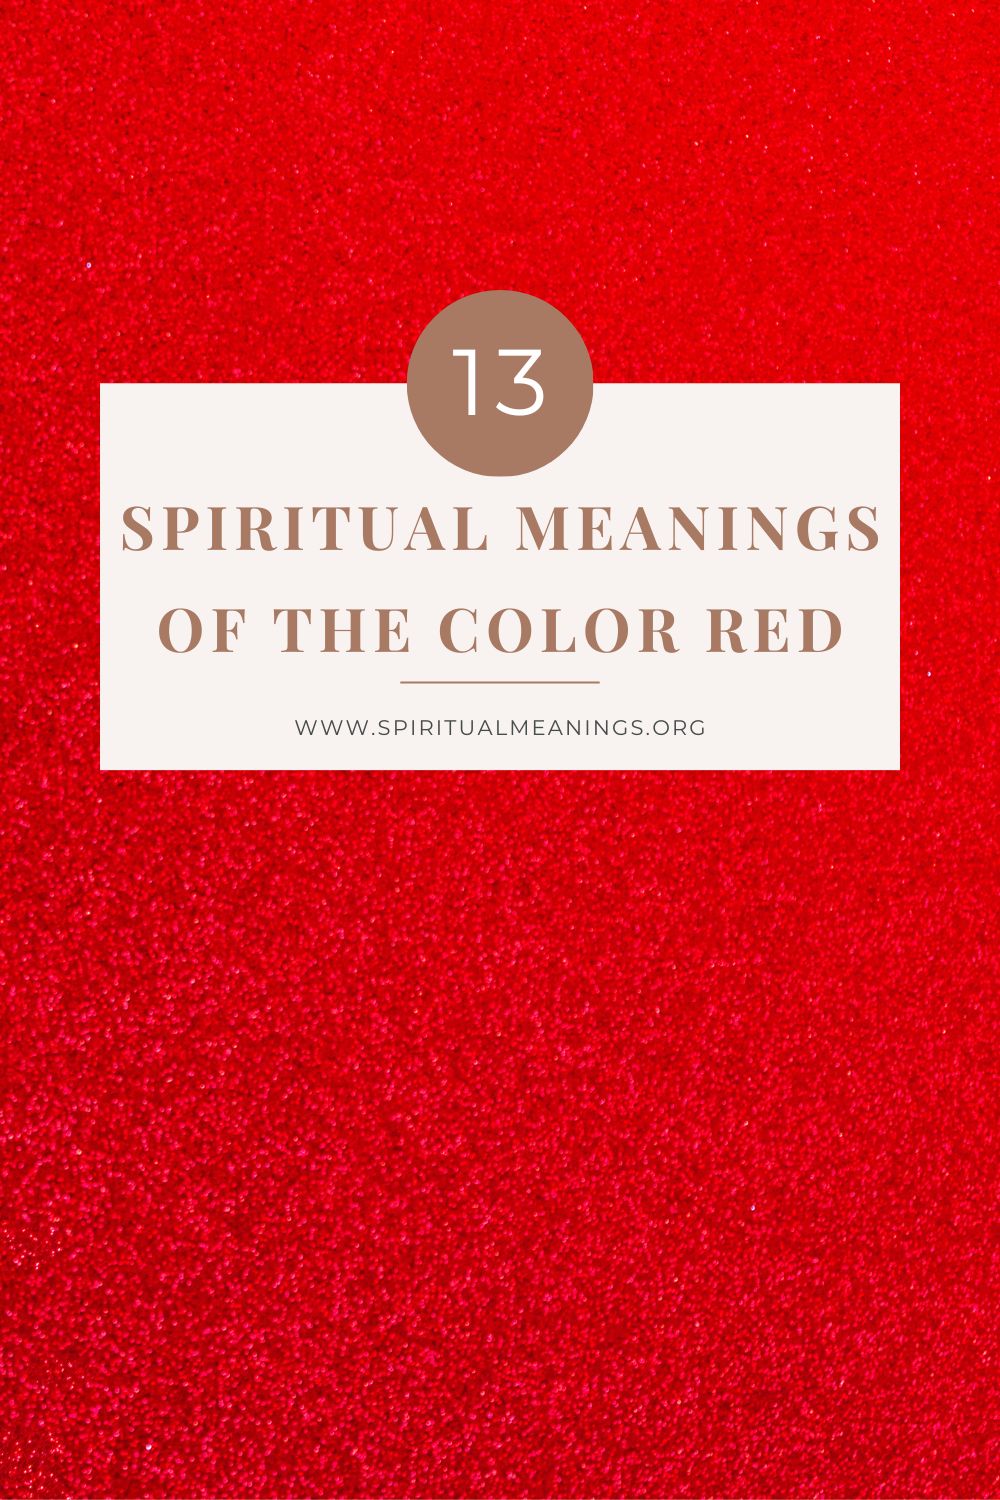 13 Spiritual Meanings Of The Color Red